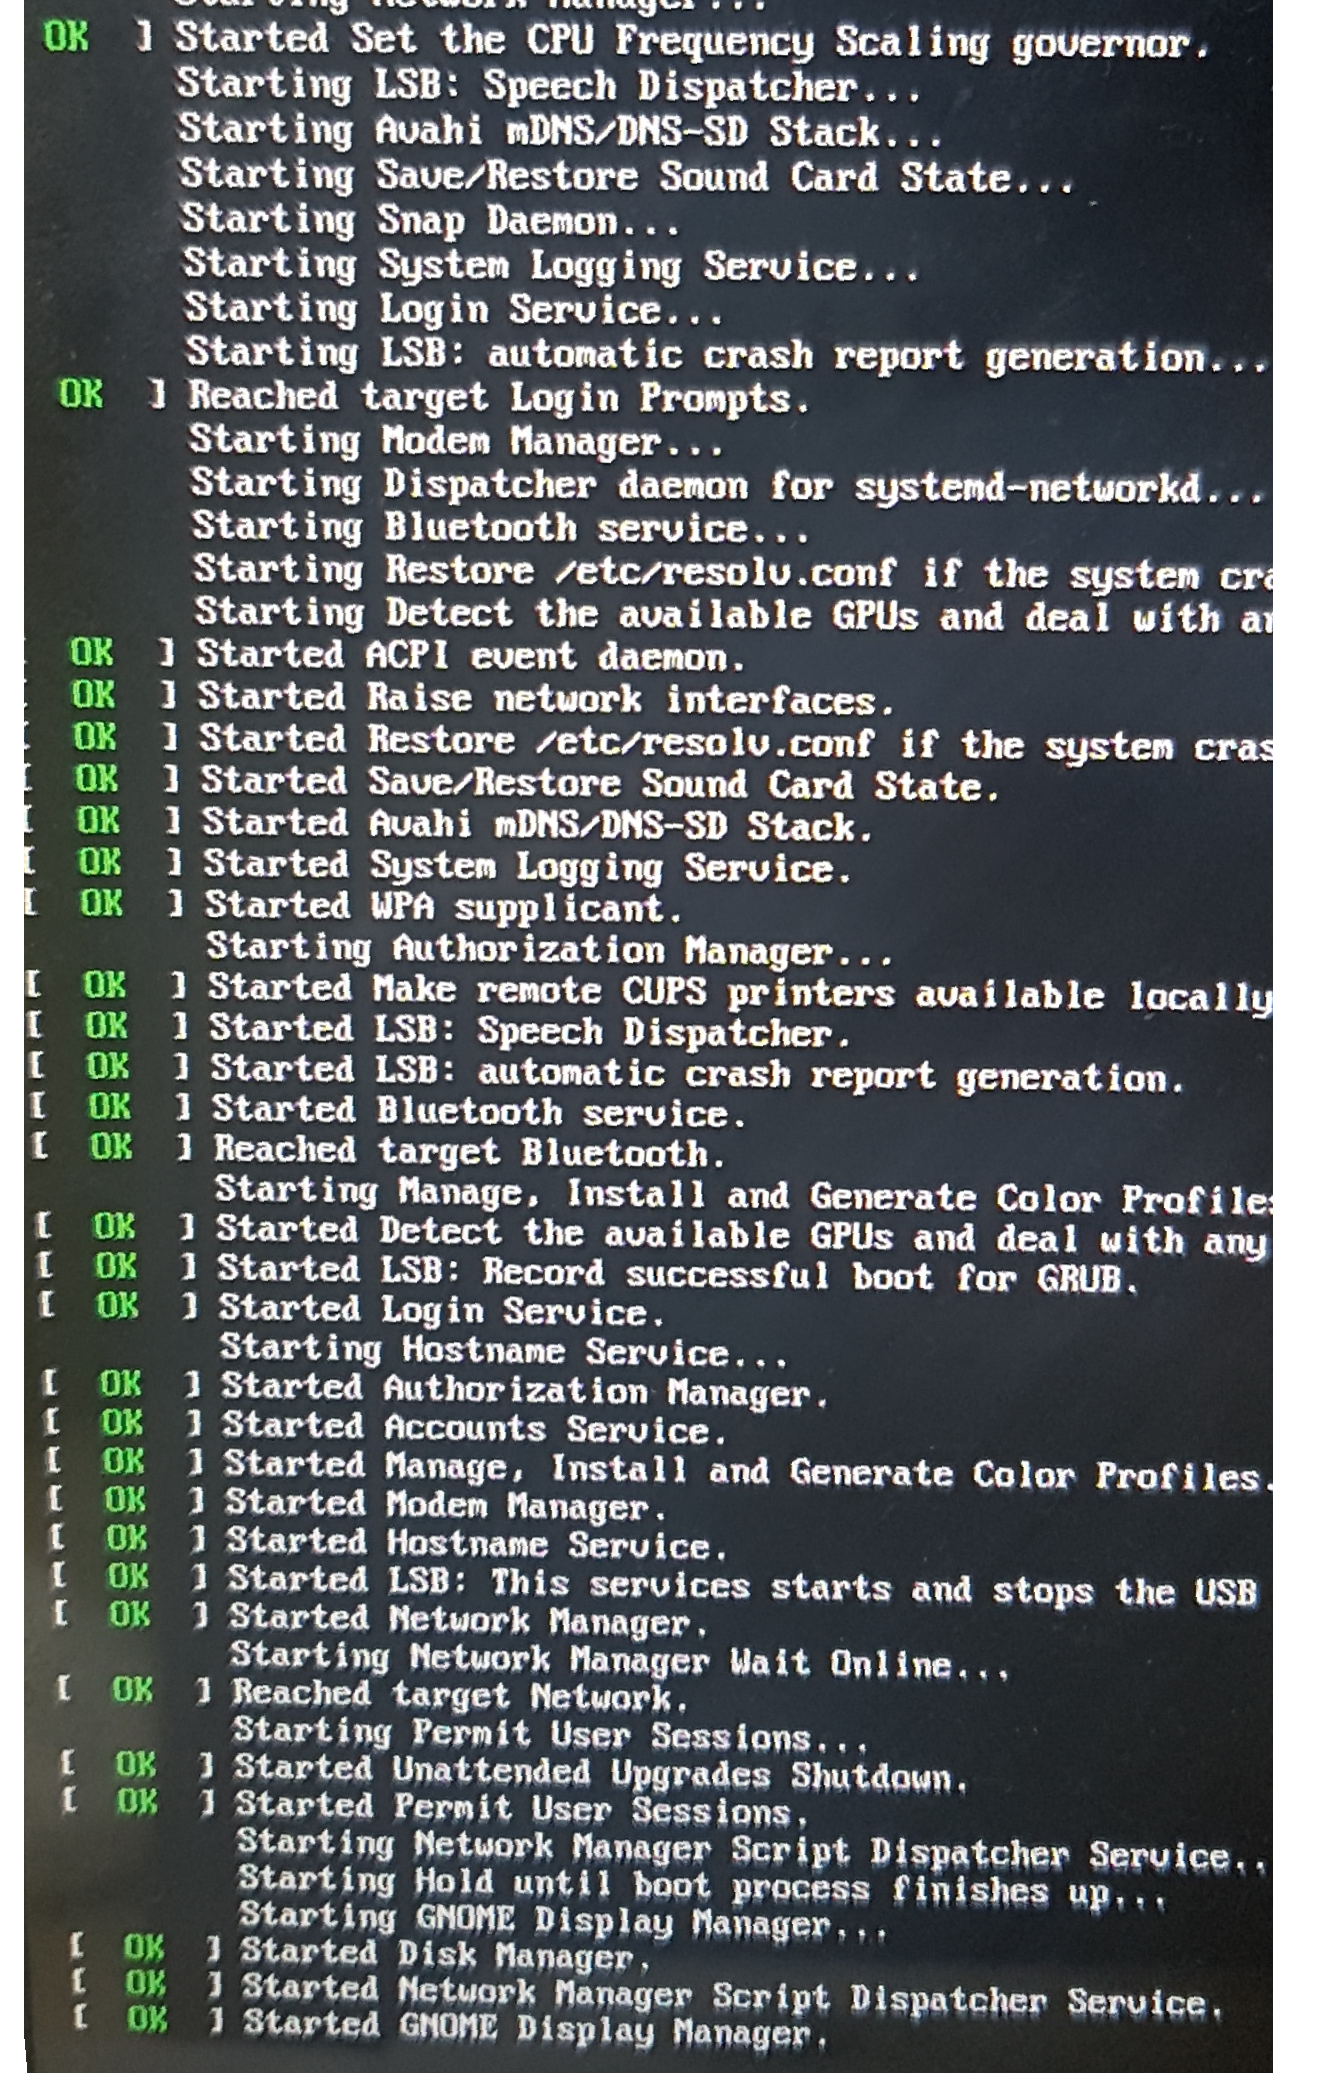 Started Gnome Display Manager img